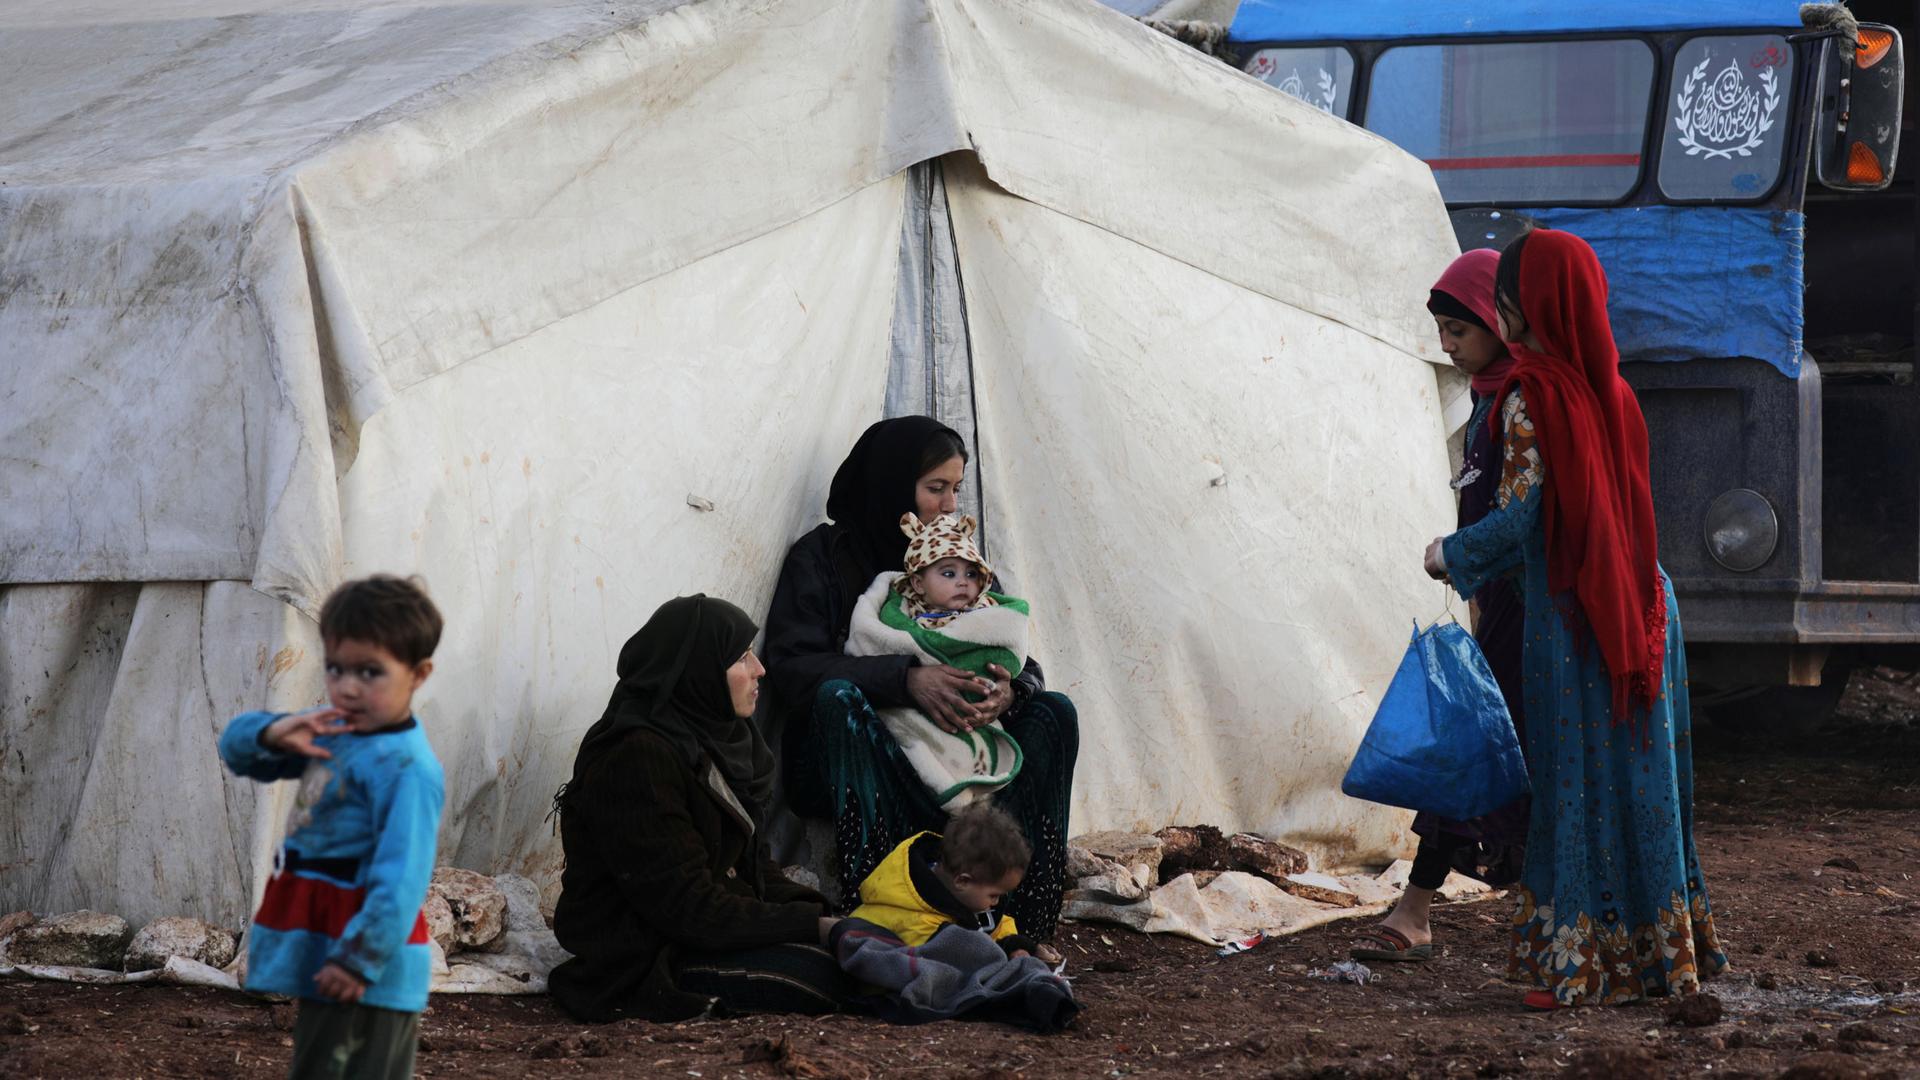 Two women wearing black hijabs are shown with several children in front of a white tent.